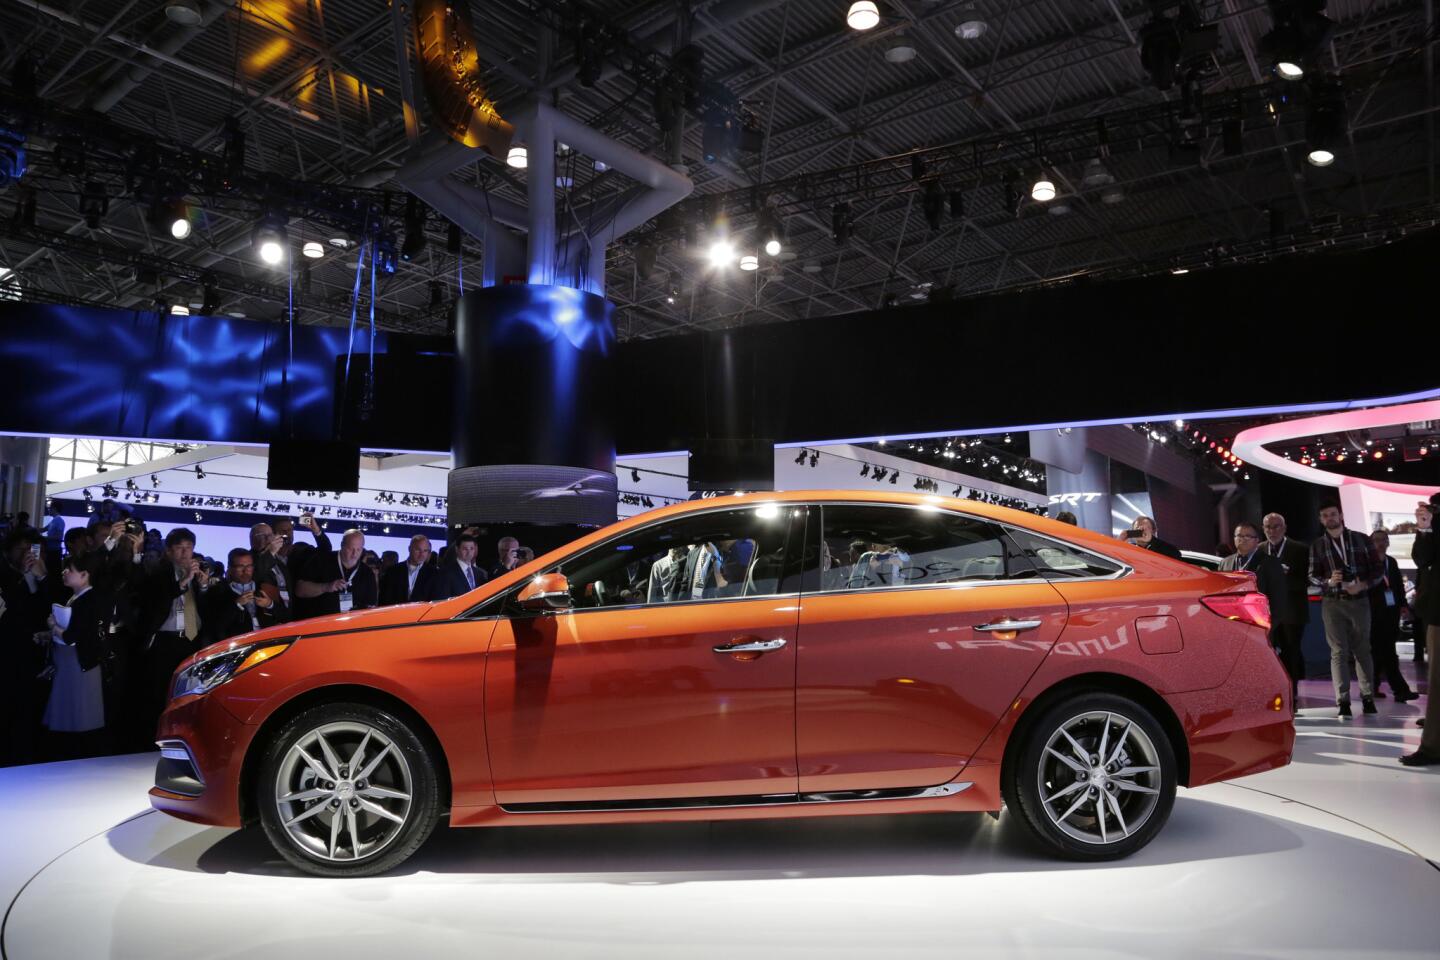 The 2015 Hyundai Sonata is introduced at the New York International Auto Show.